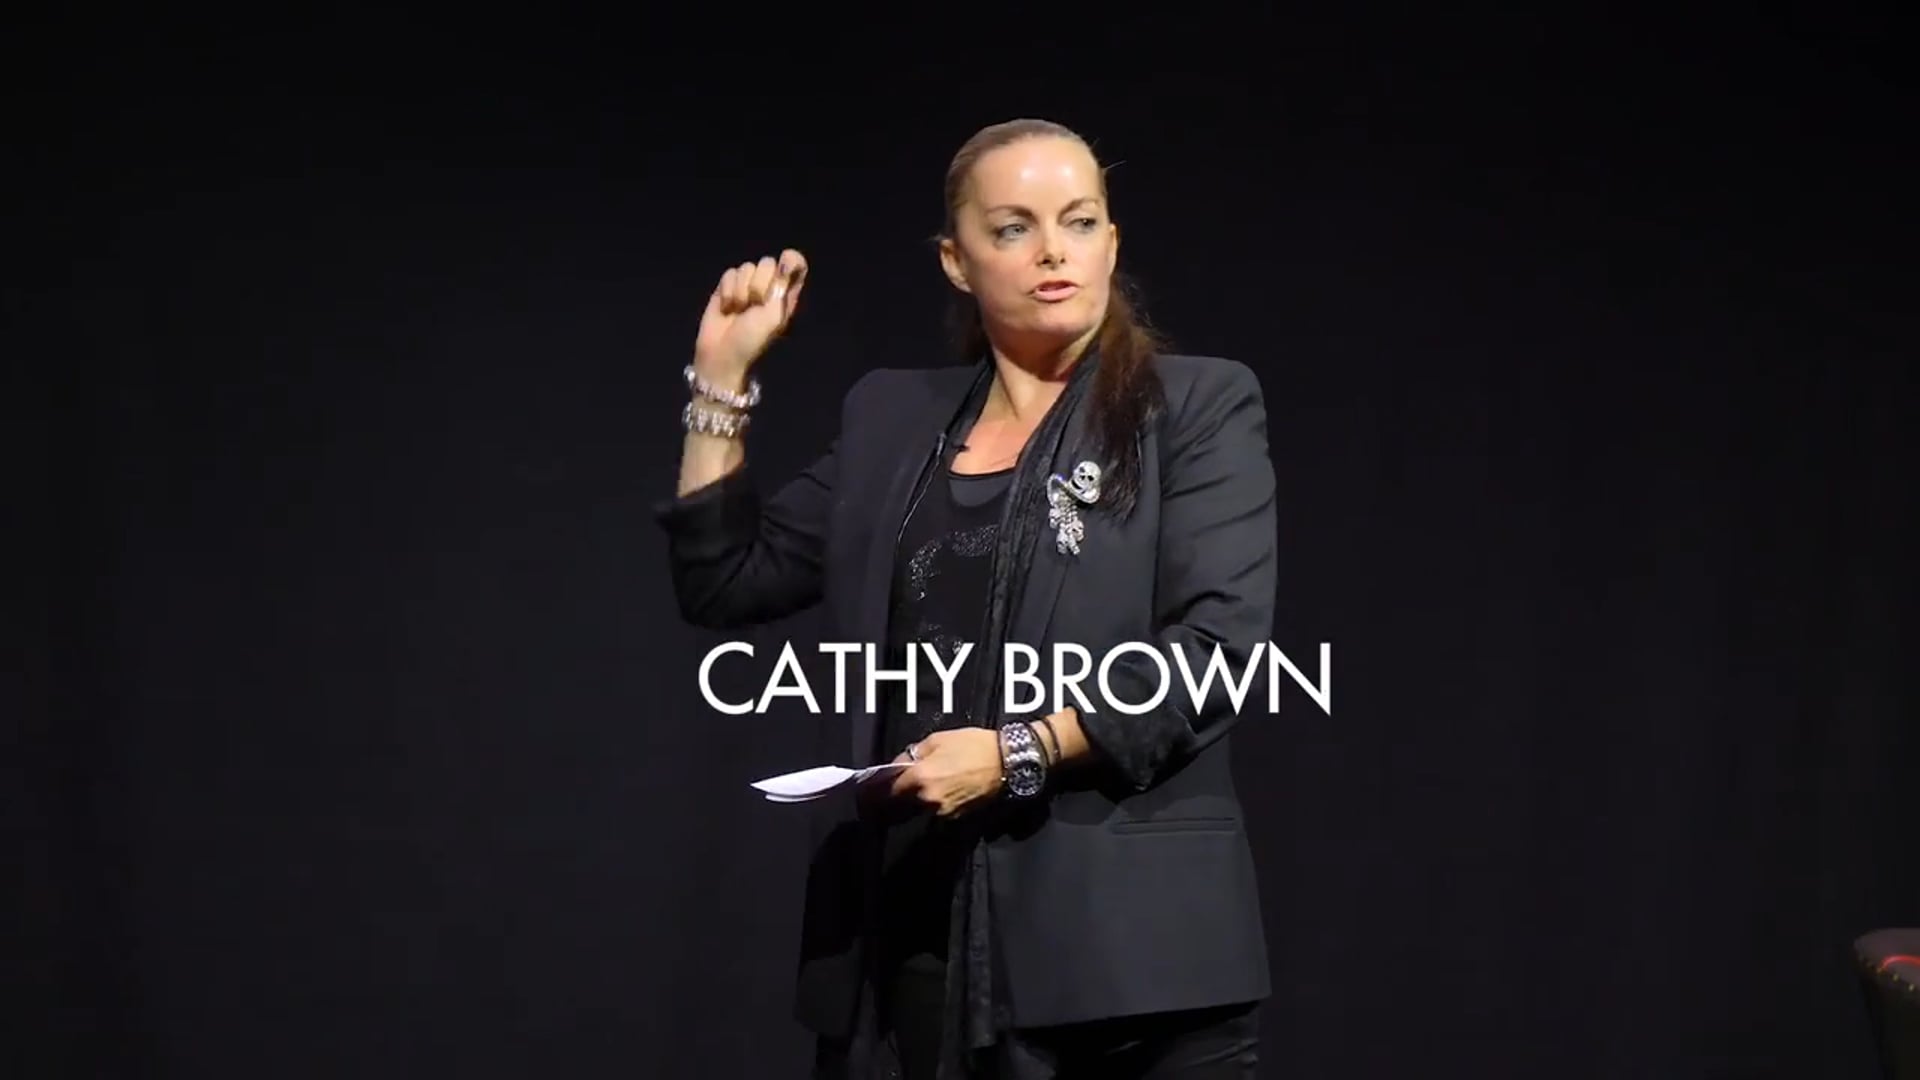 Equality, Sports and Happiness With Professional Boxer Cathy Brown